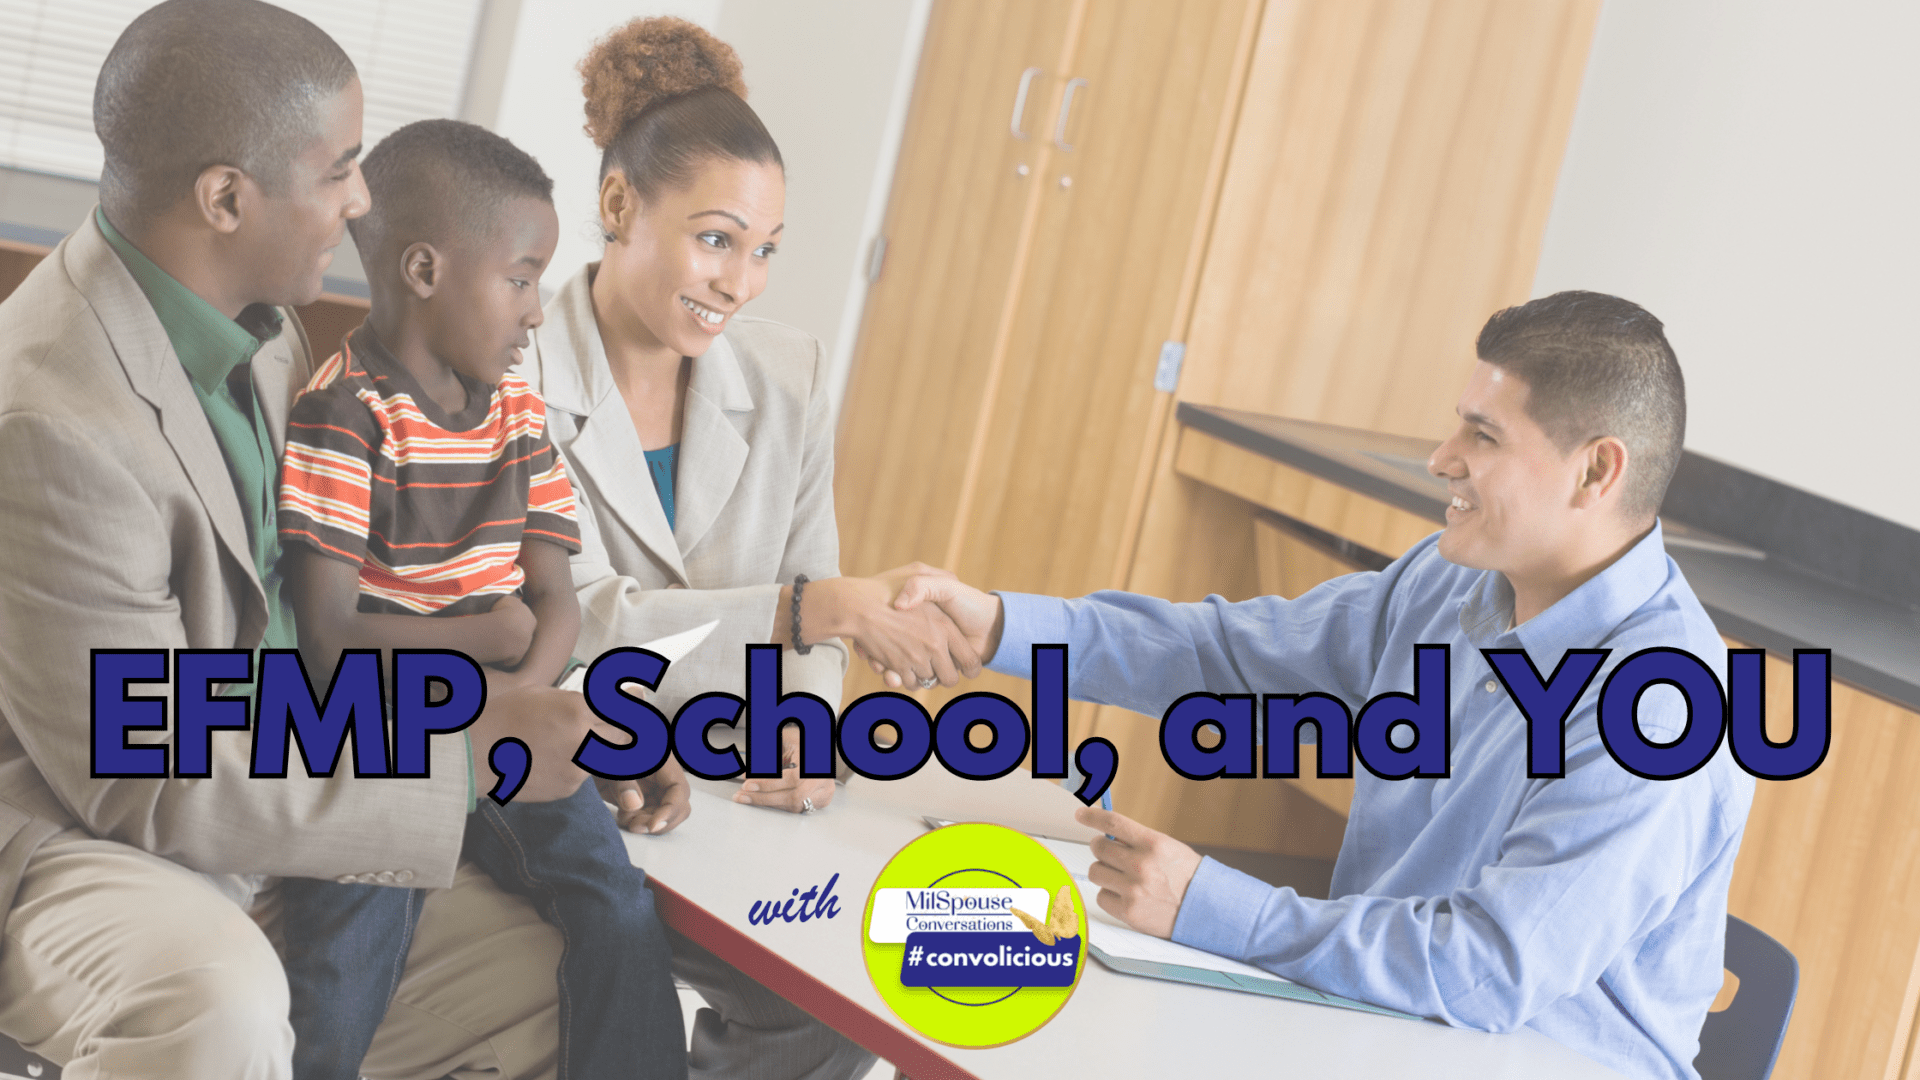 EFMP, School, and You!